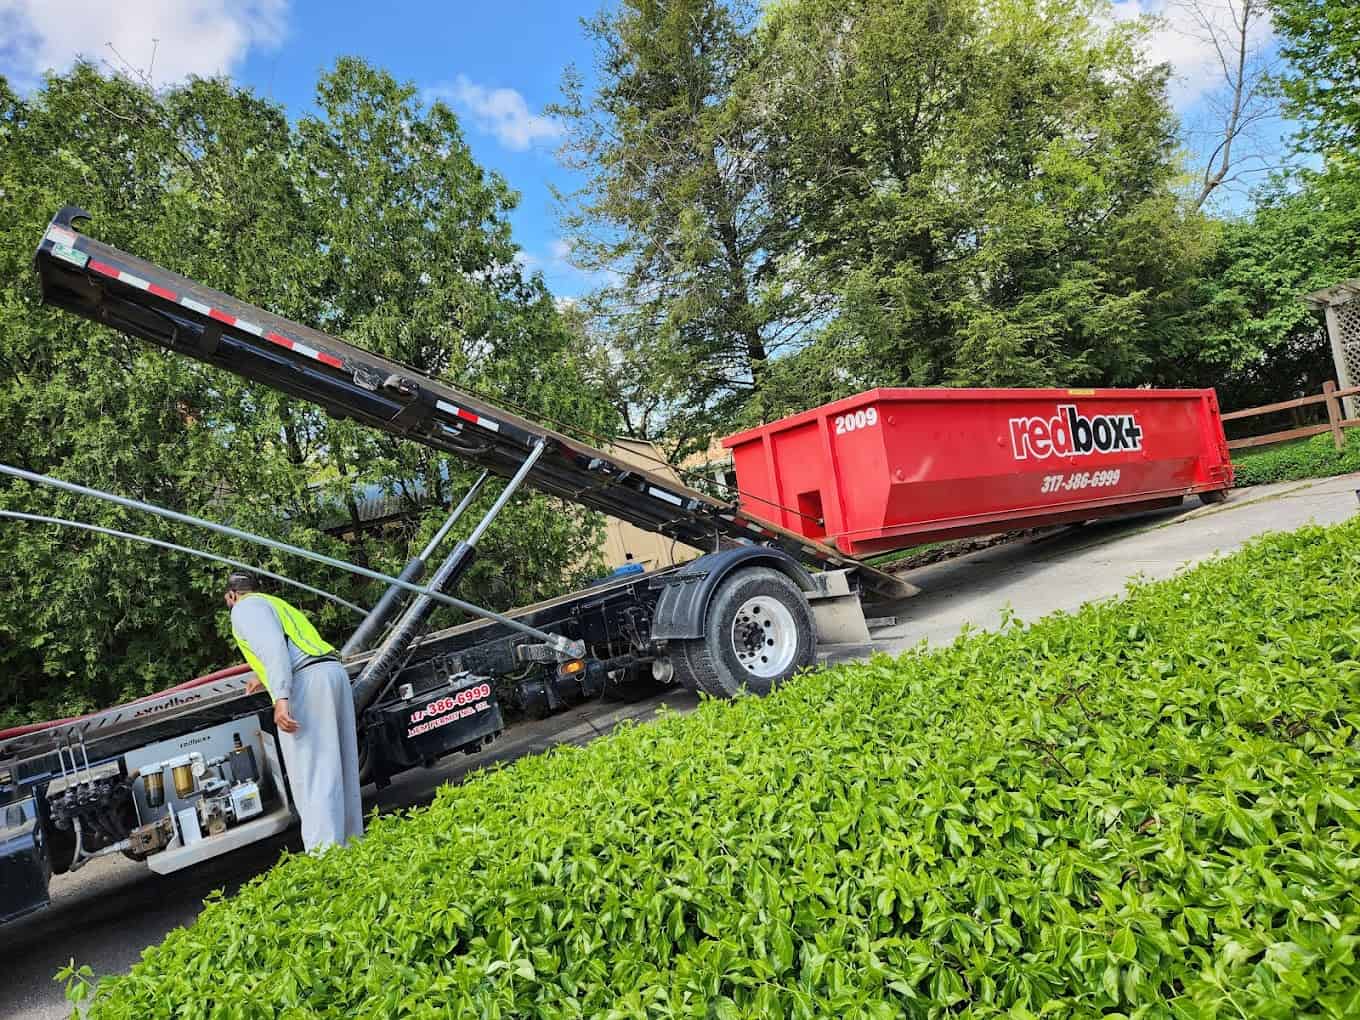 20 yard dumpster rental in Indianapolis